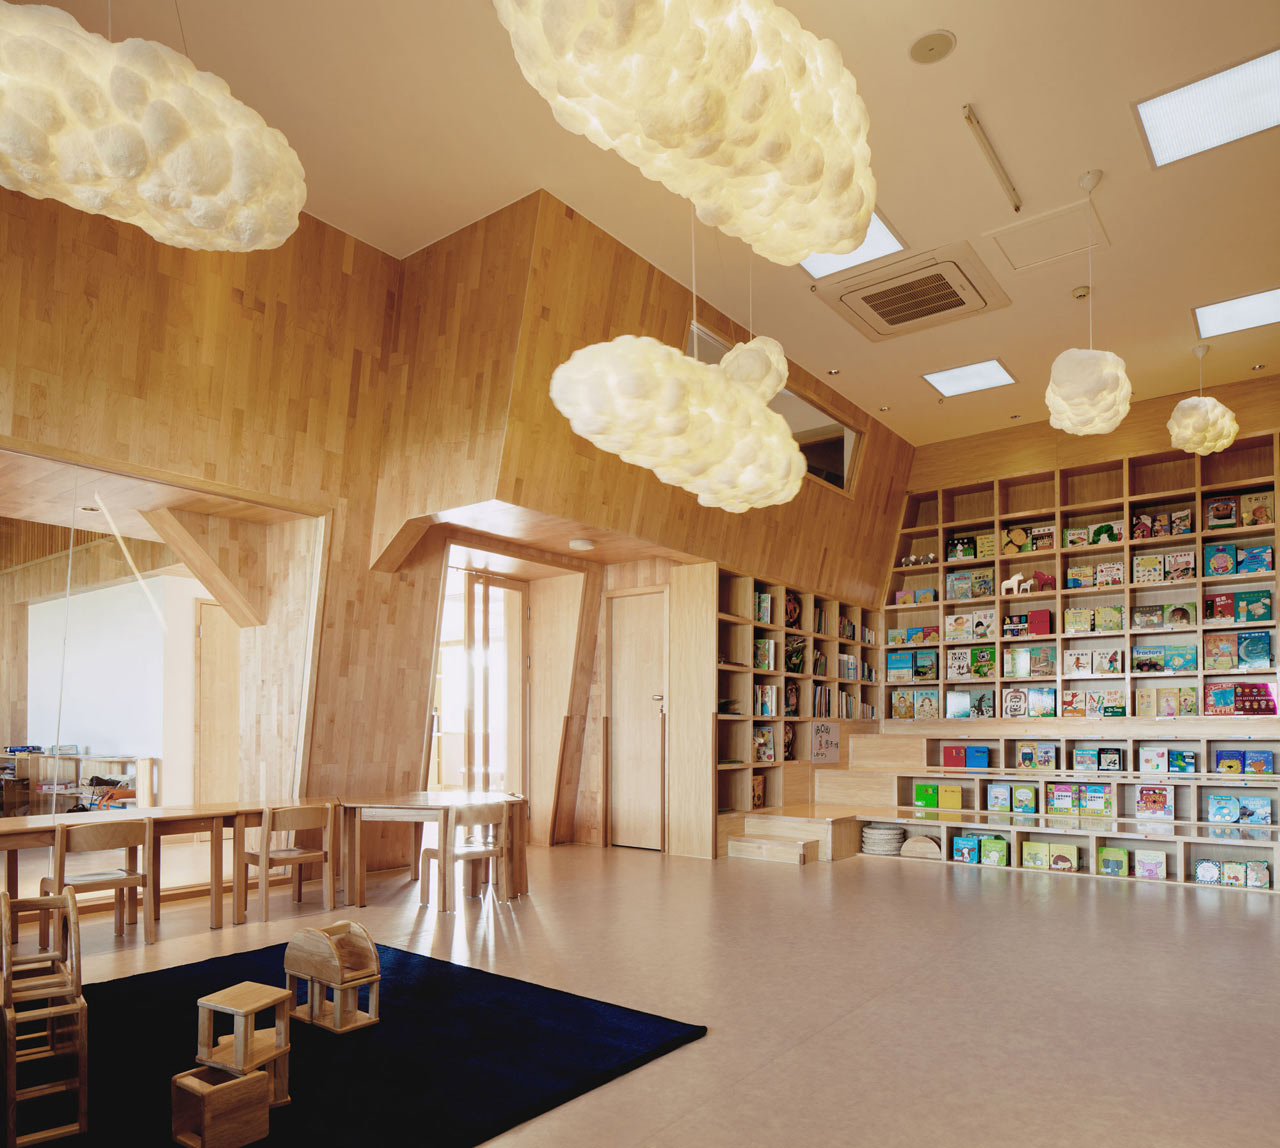 This Modern Montessori Kindergarten Will Make You Want to Head Back to School